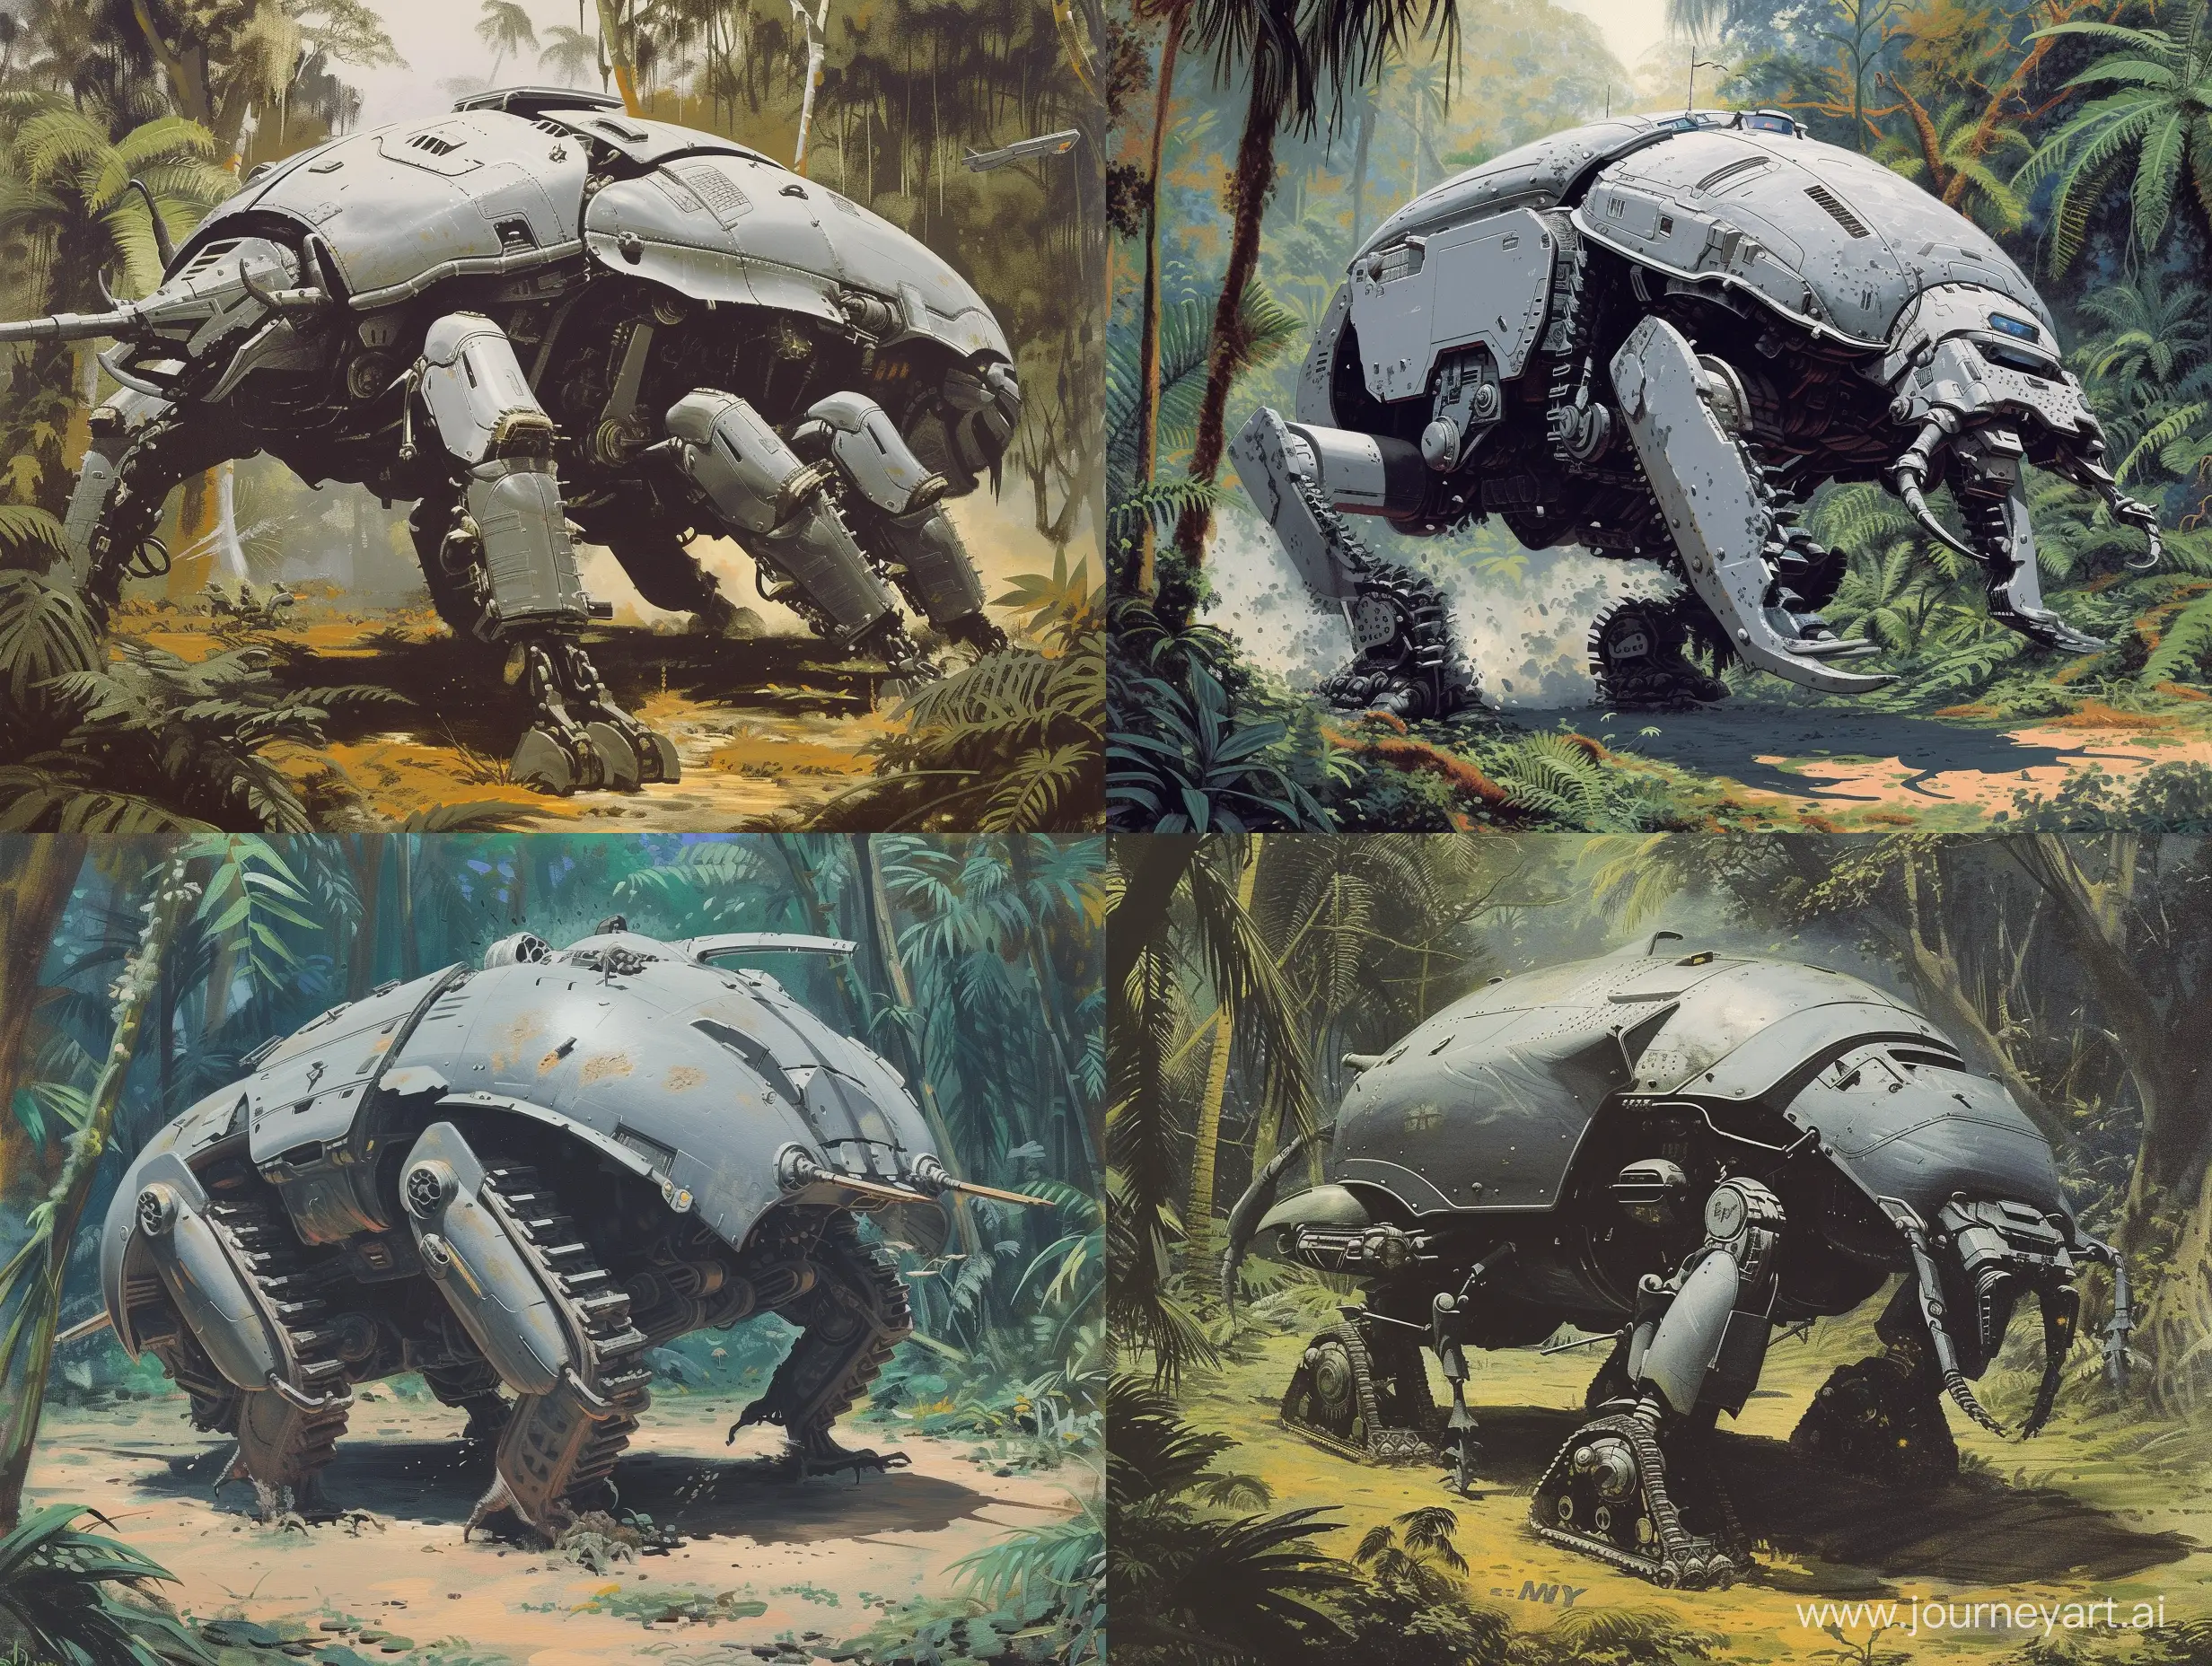 Concept art of a giant armored gray tank slightly resembling a rhinoceros beetle fighting in a jungle painted by Ralph McQuarrie. the tank has treads instead of legs. in Retro Science Fiction Art style. in color.
